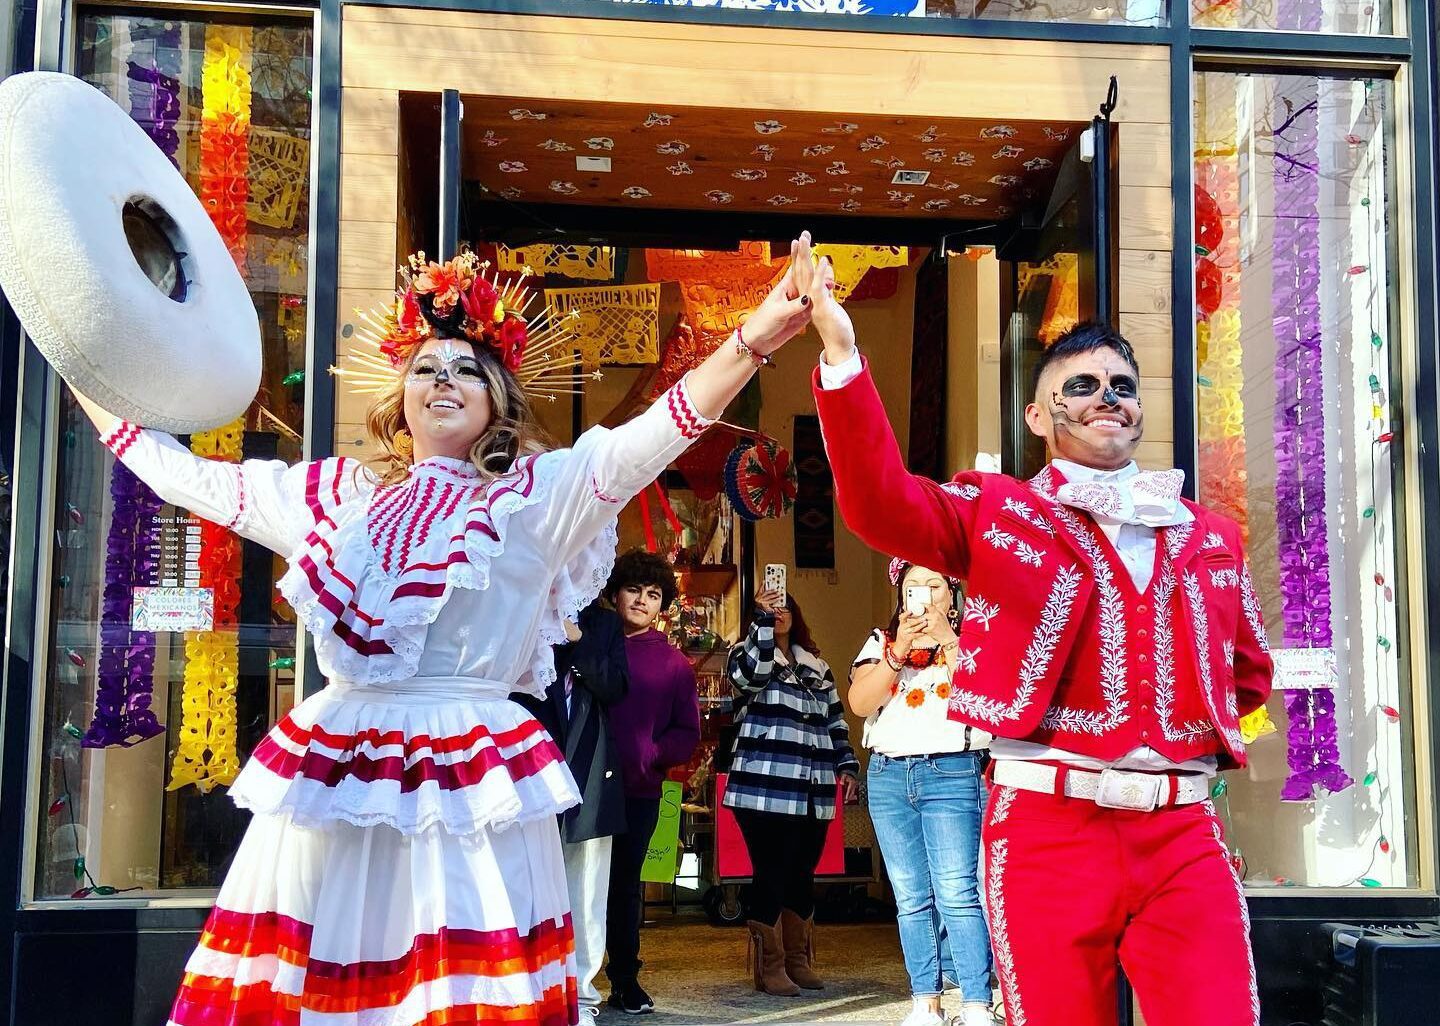 Navy Pier Celebrates Mexican Culture with Mexico Fest